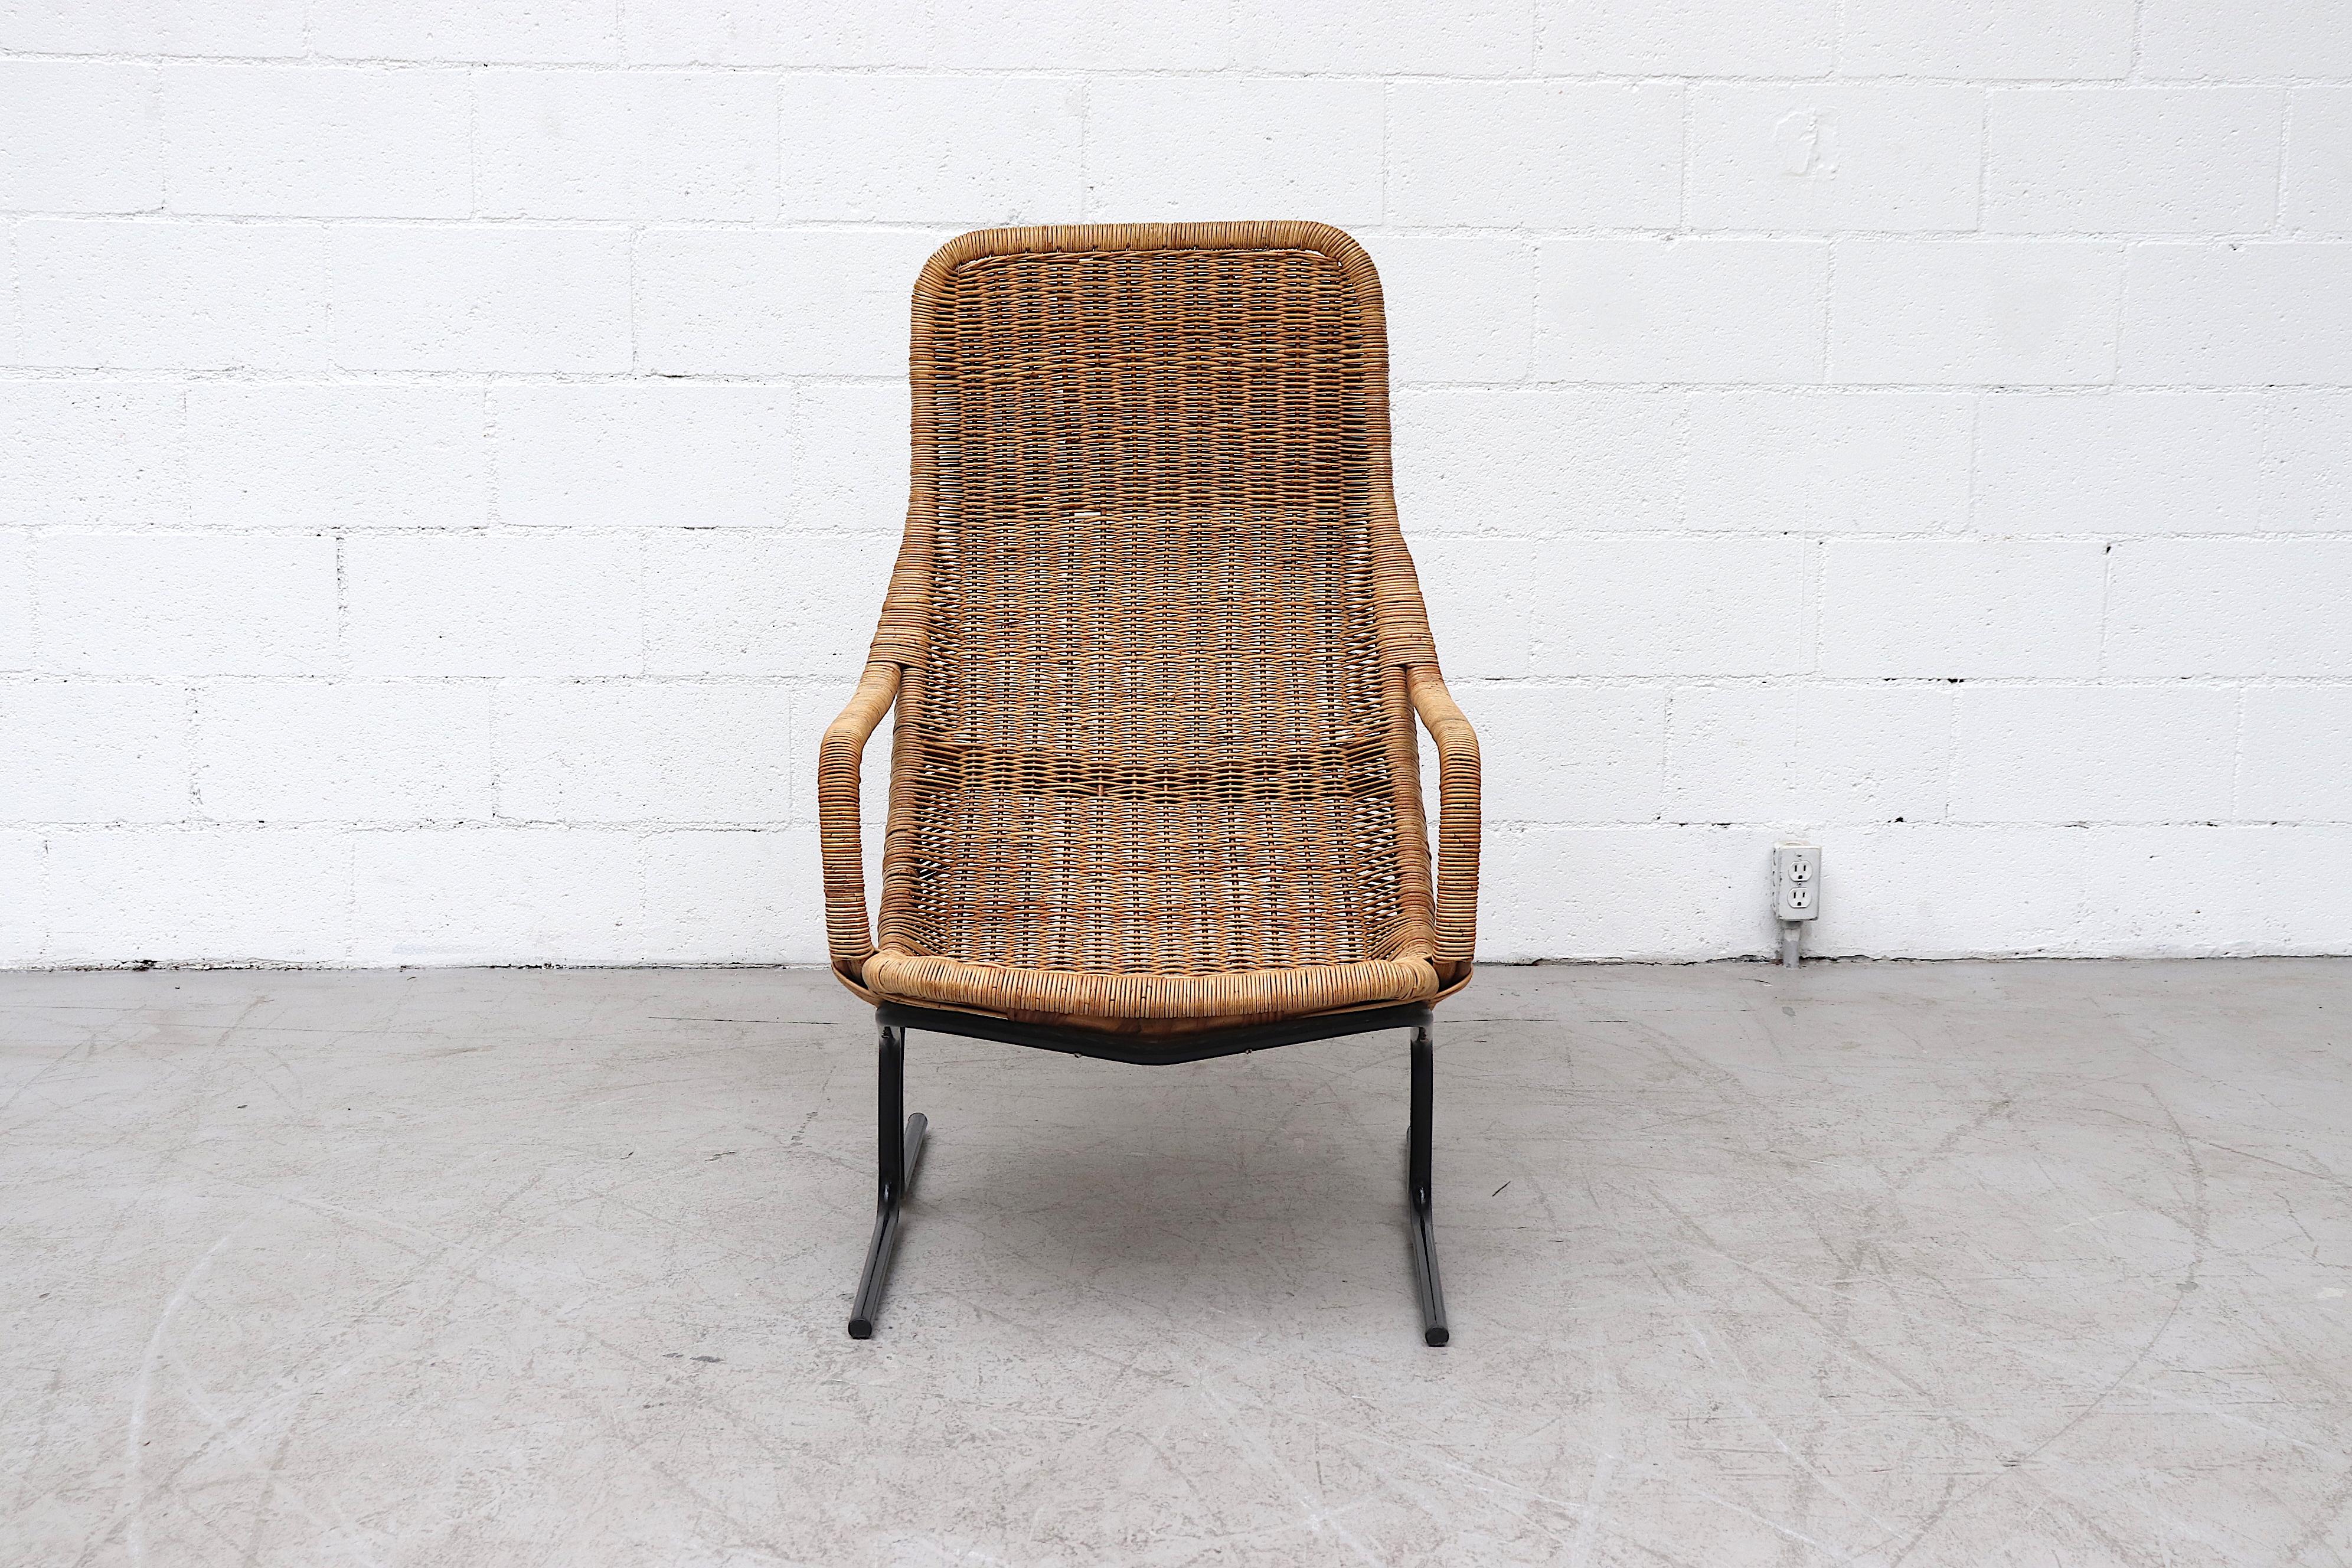 Beautiful Dirk Van Sliedregt high back woven rattan lounge chair with tubular black enameled metal frame in original condition with visible signs of wear and minimal rattan loss.